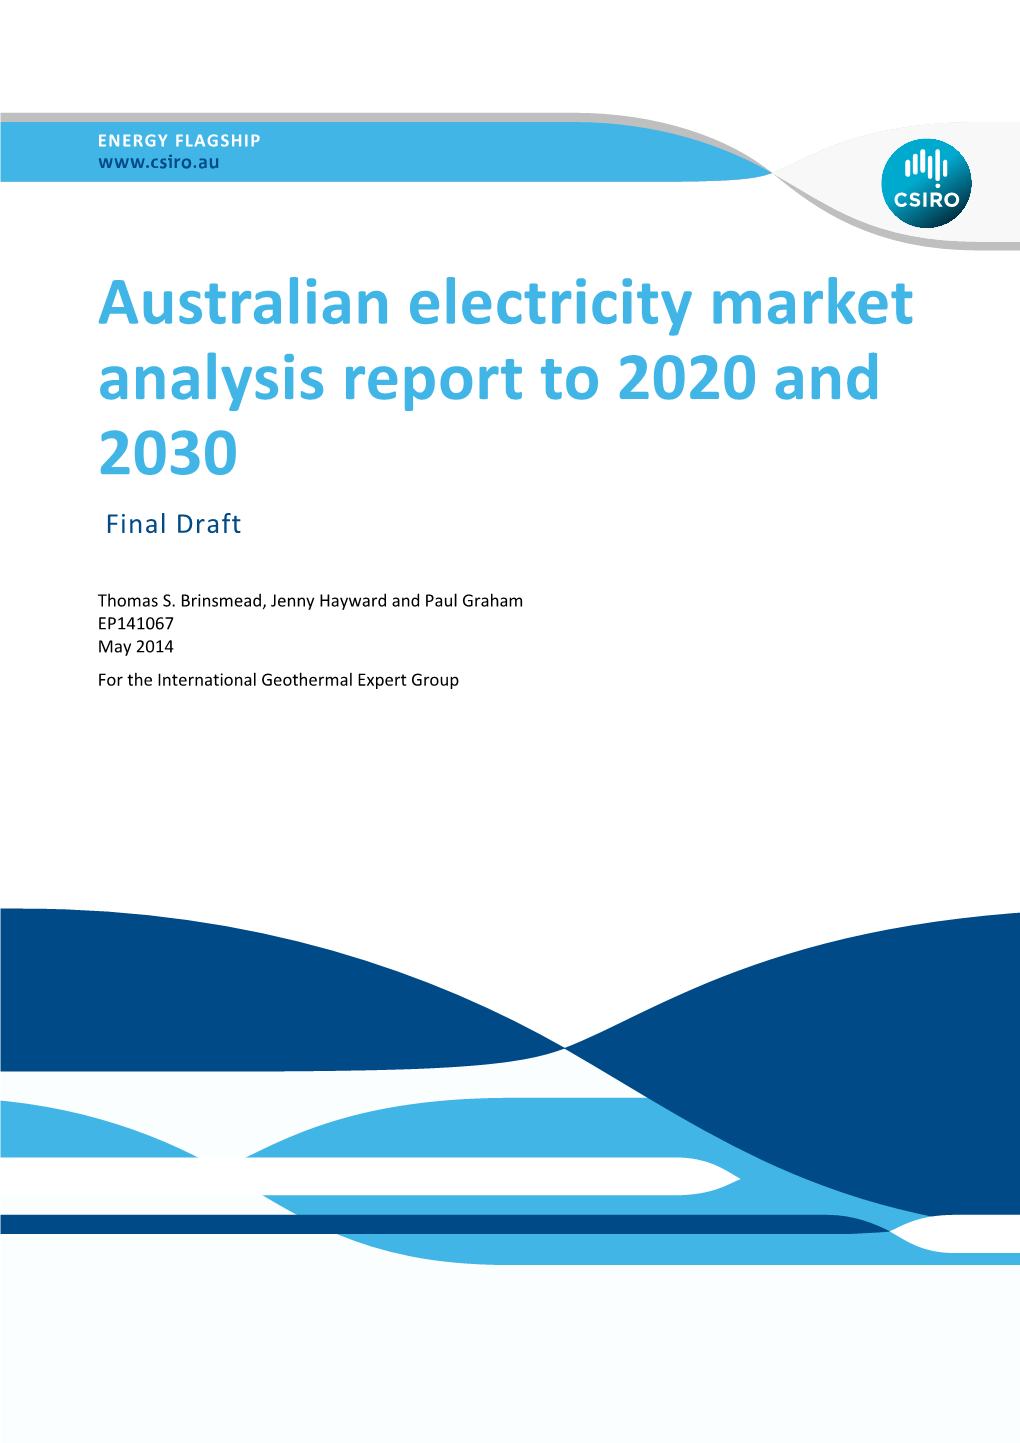 Australian Electricity Market Analysis Report to 2020 and 2030 Final Draft